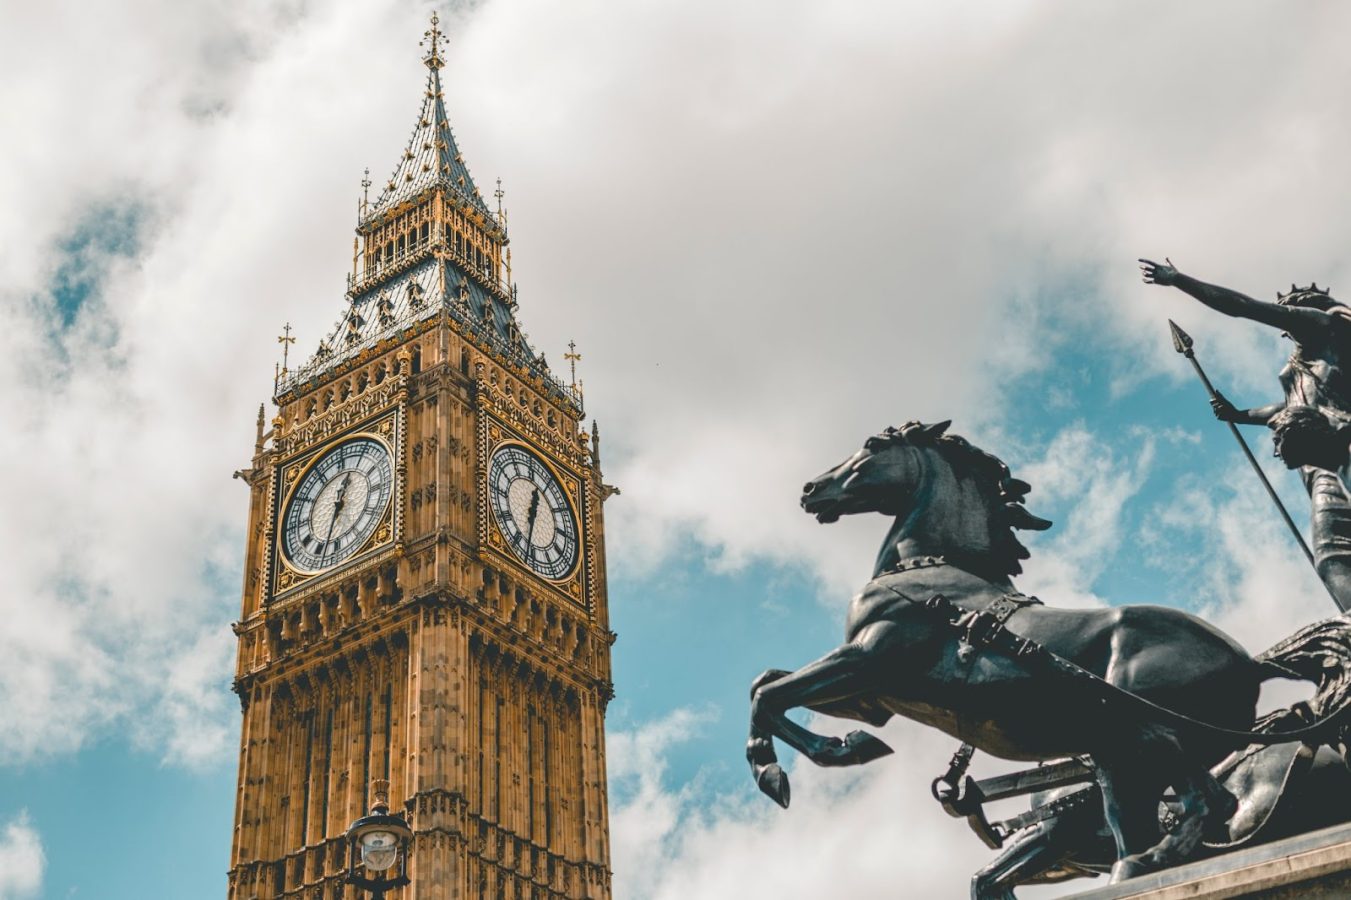 Big Ben clock tower and a statue of a horse in London, England - the destination to travel to for Education majors.